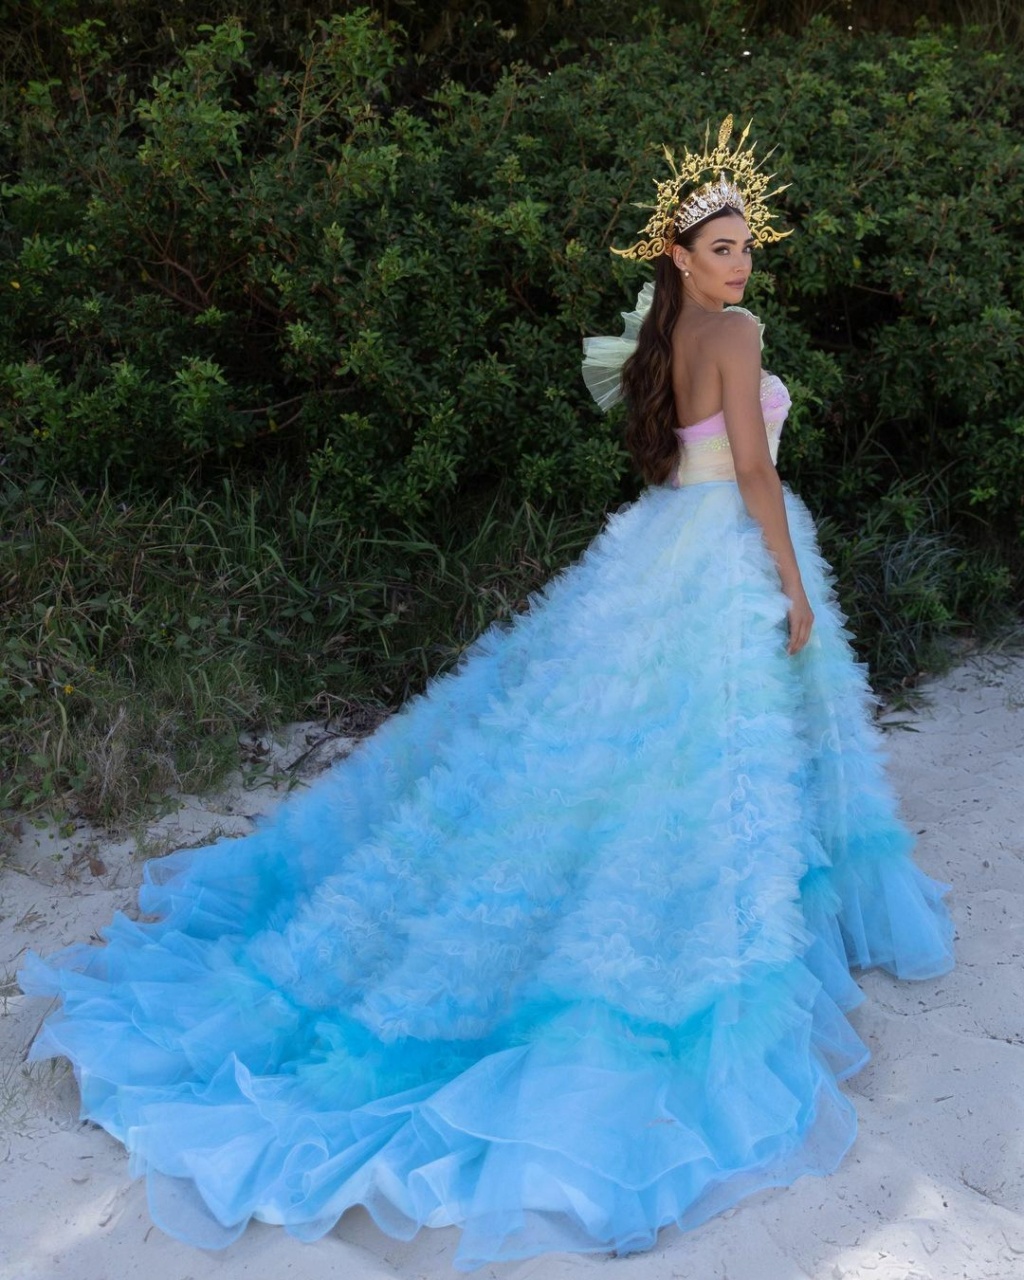  ♔ MISS UNIVERSE 2022 - NATIONAL COSTUME  ♔ 32081510